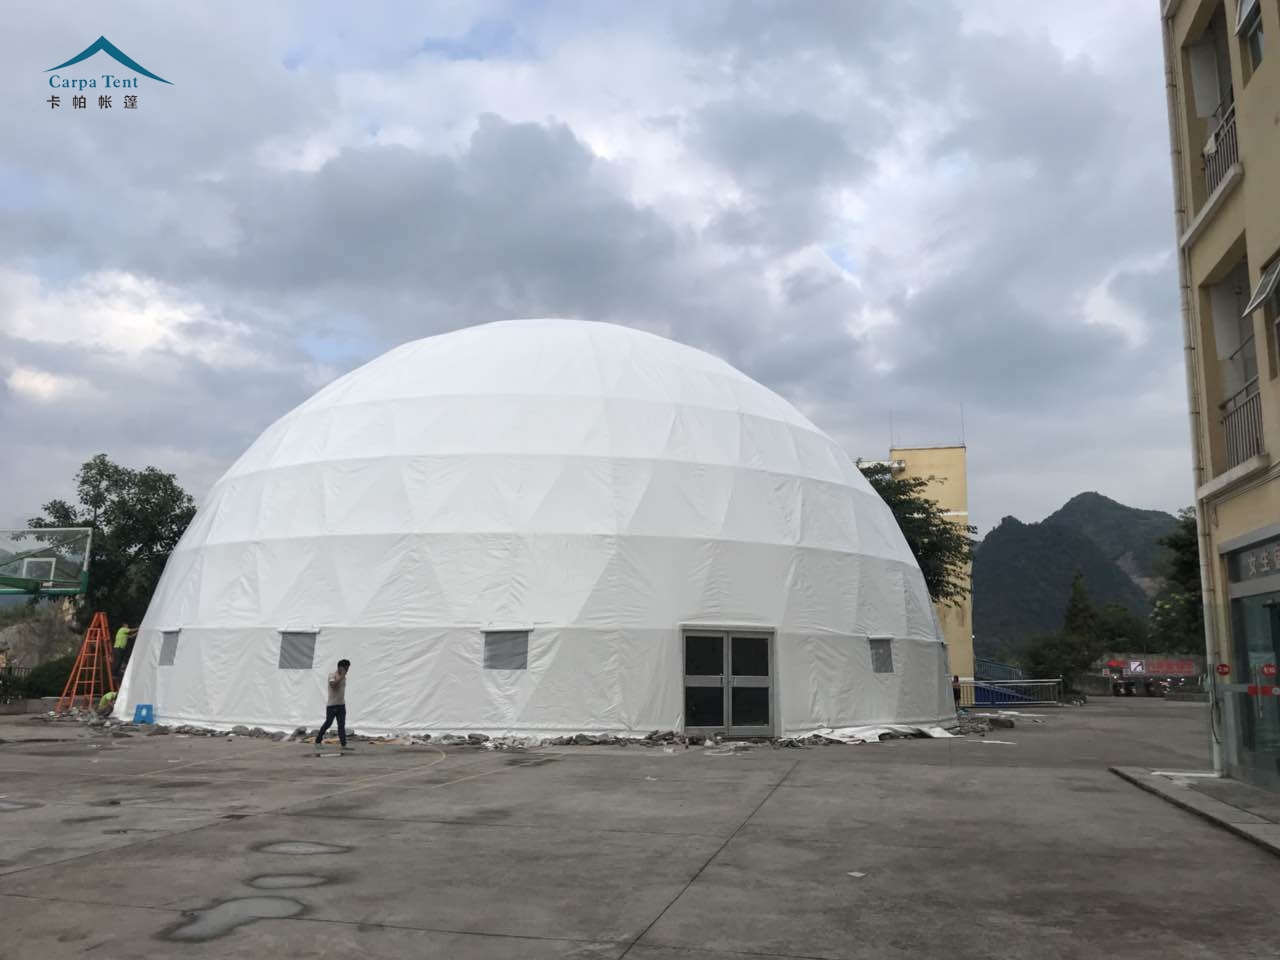 http://www.carpa-tent.com/data/images/product/20181029104910_974.jpg